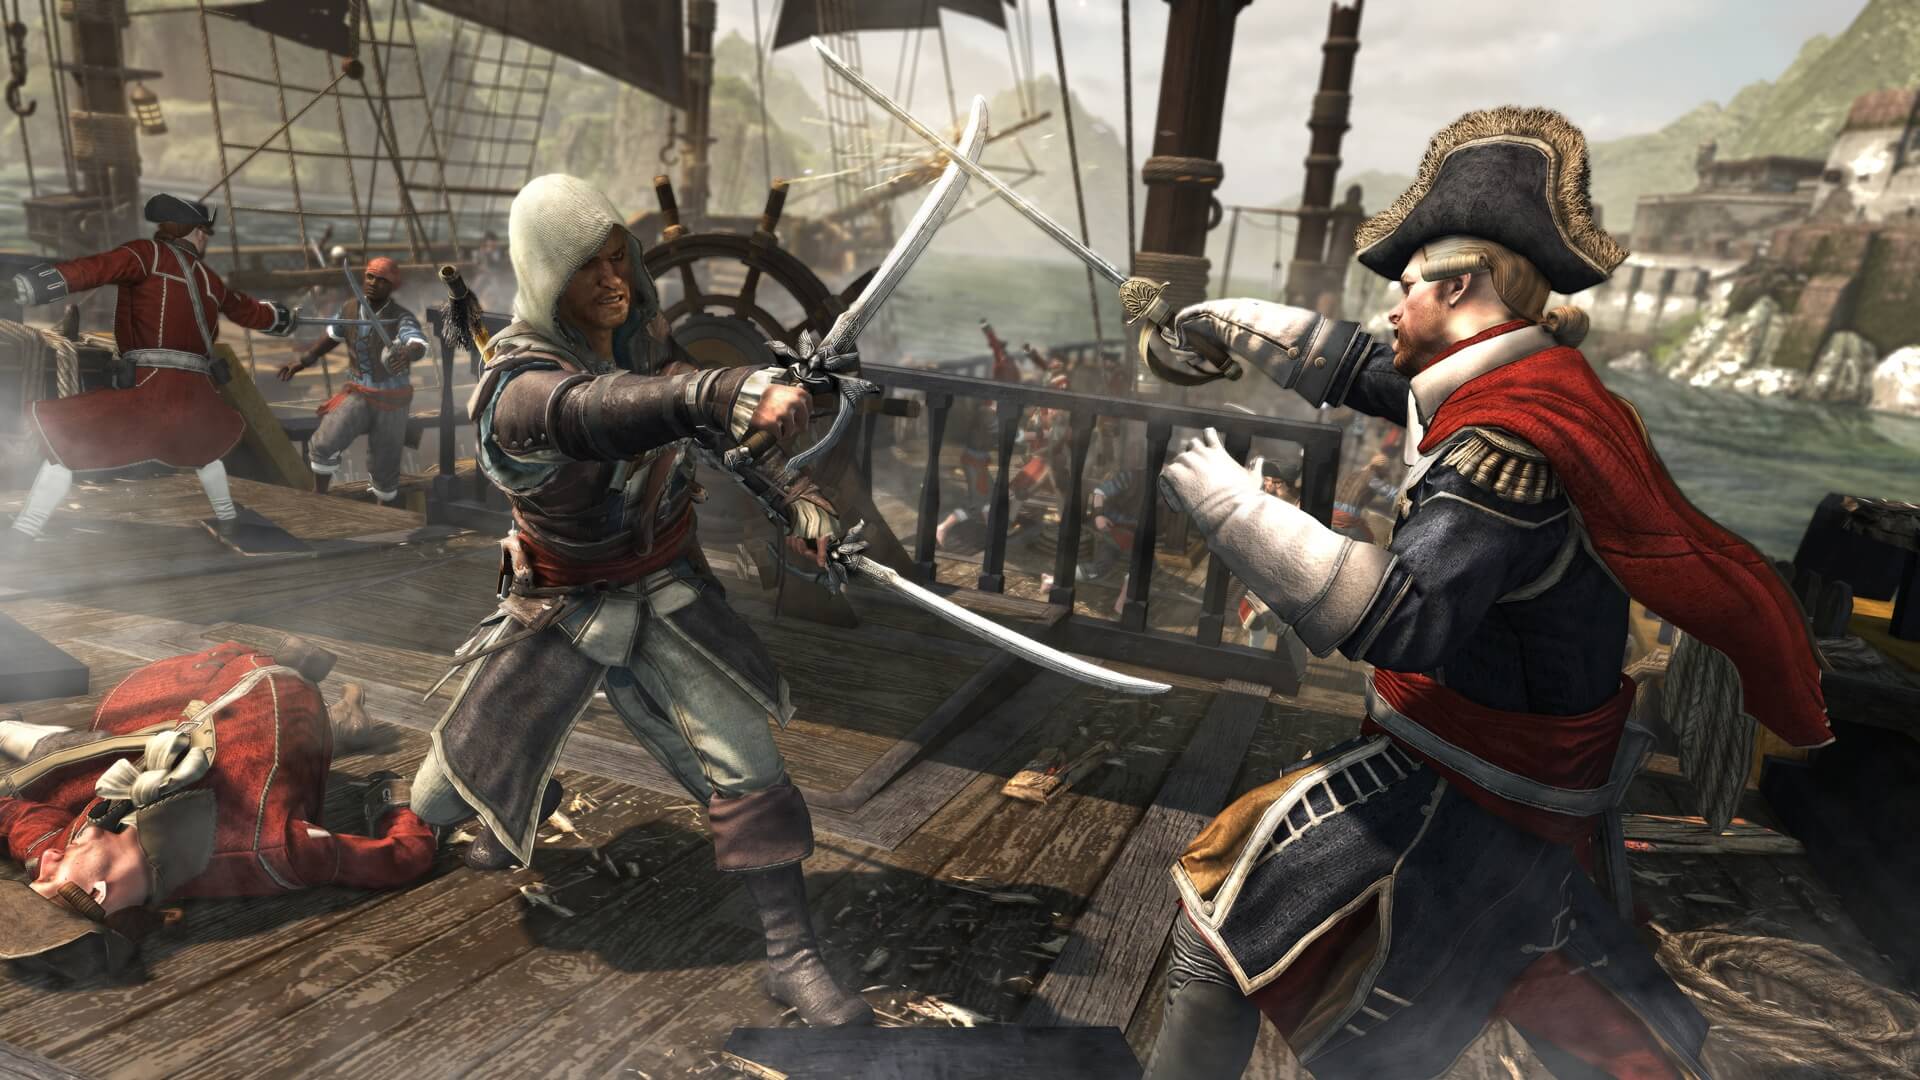 Assassin's Creed IV : Black Flag HIGHLY COMPRESSED FOR PC IN 500 MB PARTS - TRAX GAMING CENTER